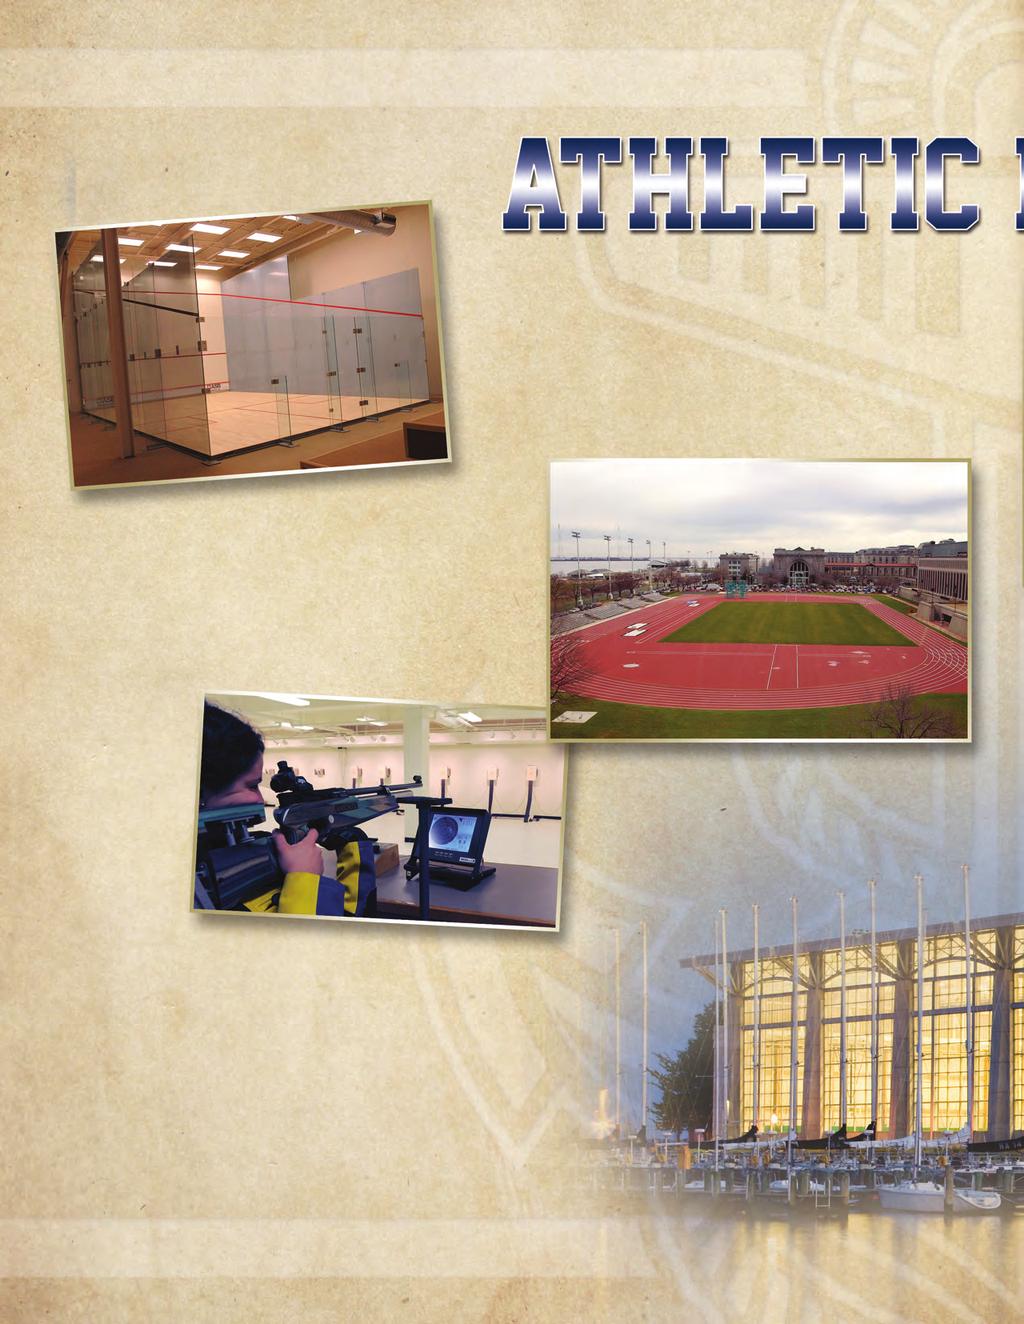 2017-18 NAVY ATLETICS q INGRAM FIELD ome of Navy outdoor track & field. Features an all-weather eight-lane MONDO track, a Daktronics scoreboard, and lights for evening competition.